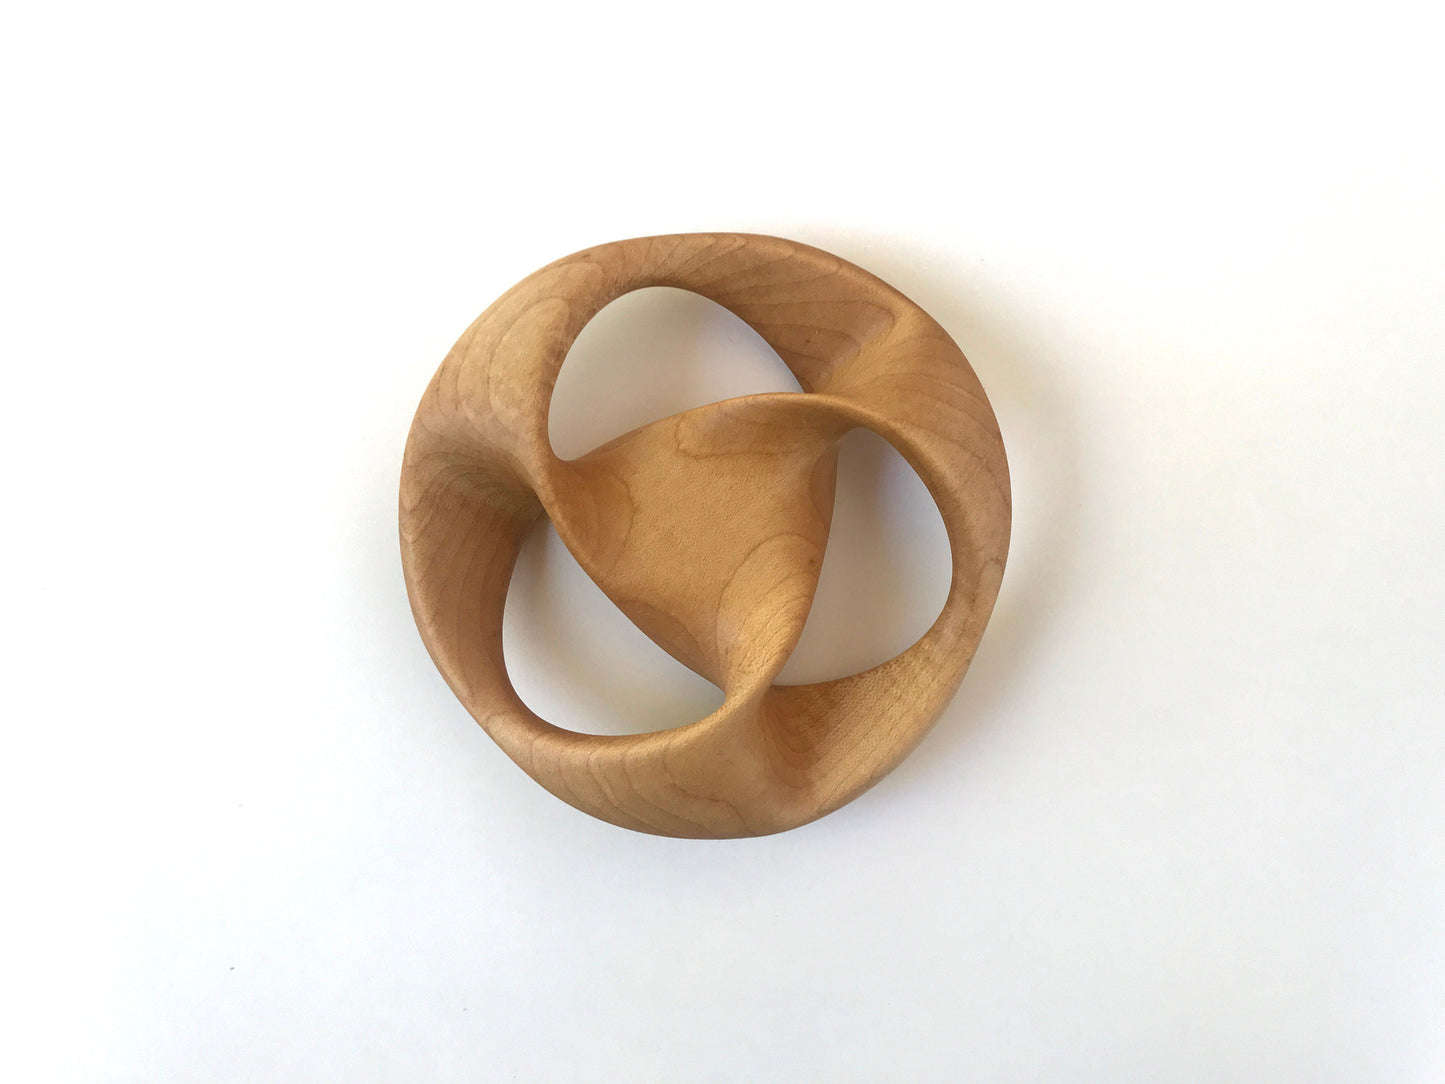 Triquetra Mobius Strip-like Wooden Sculpture, Maple Wood, 5"